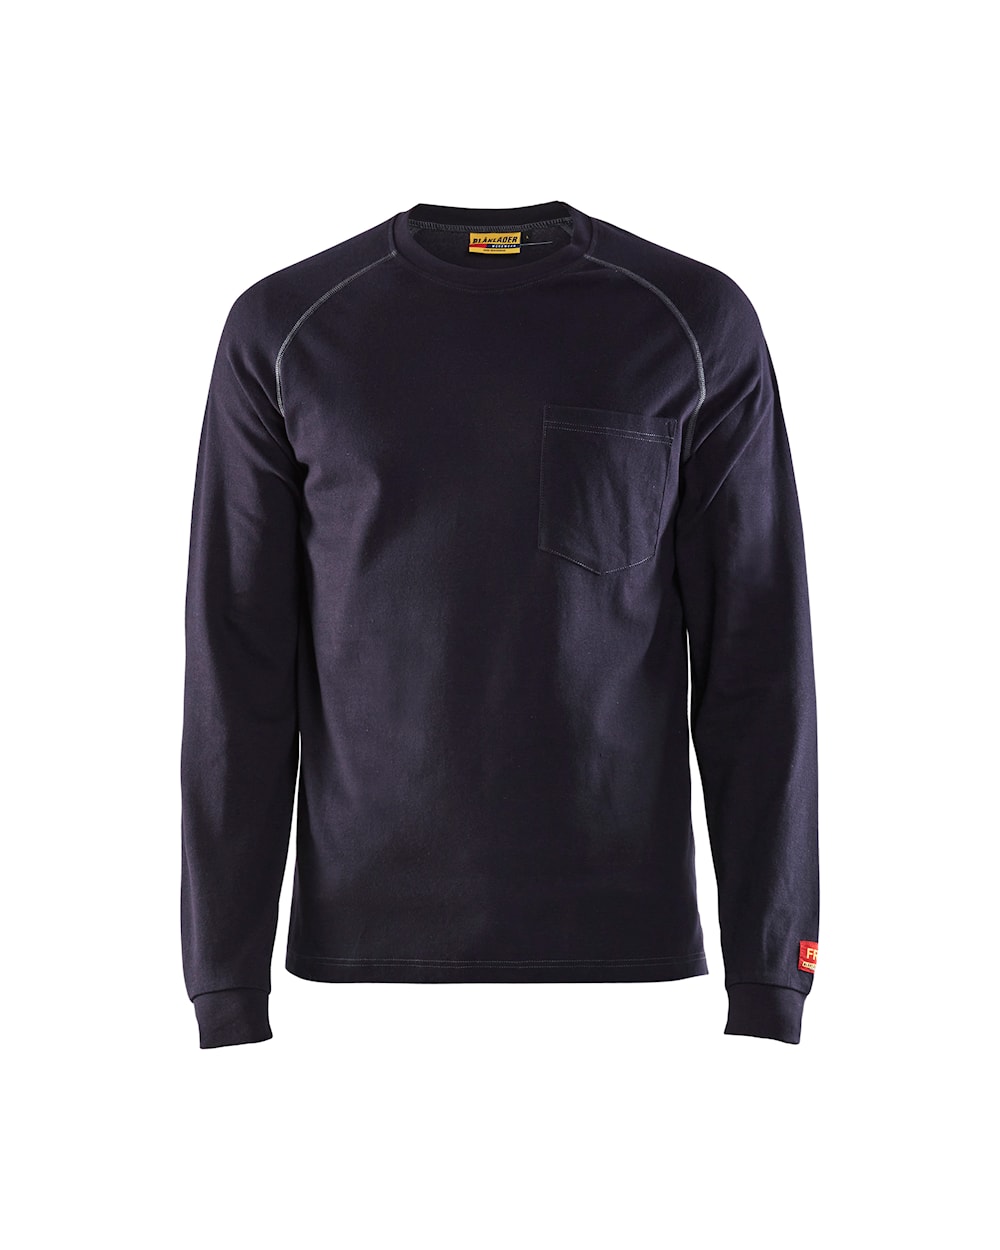 Blaklader 3493 Fire Resistant Long Sleeve T-Shirt from Columbia Safety